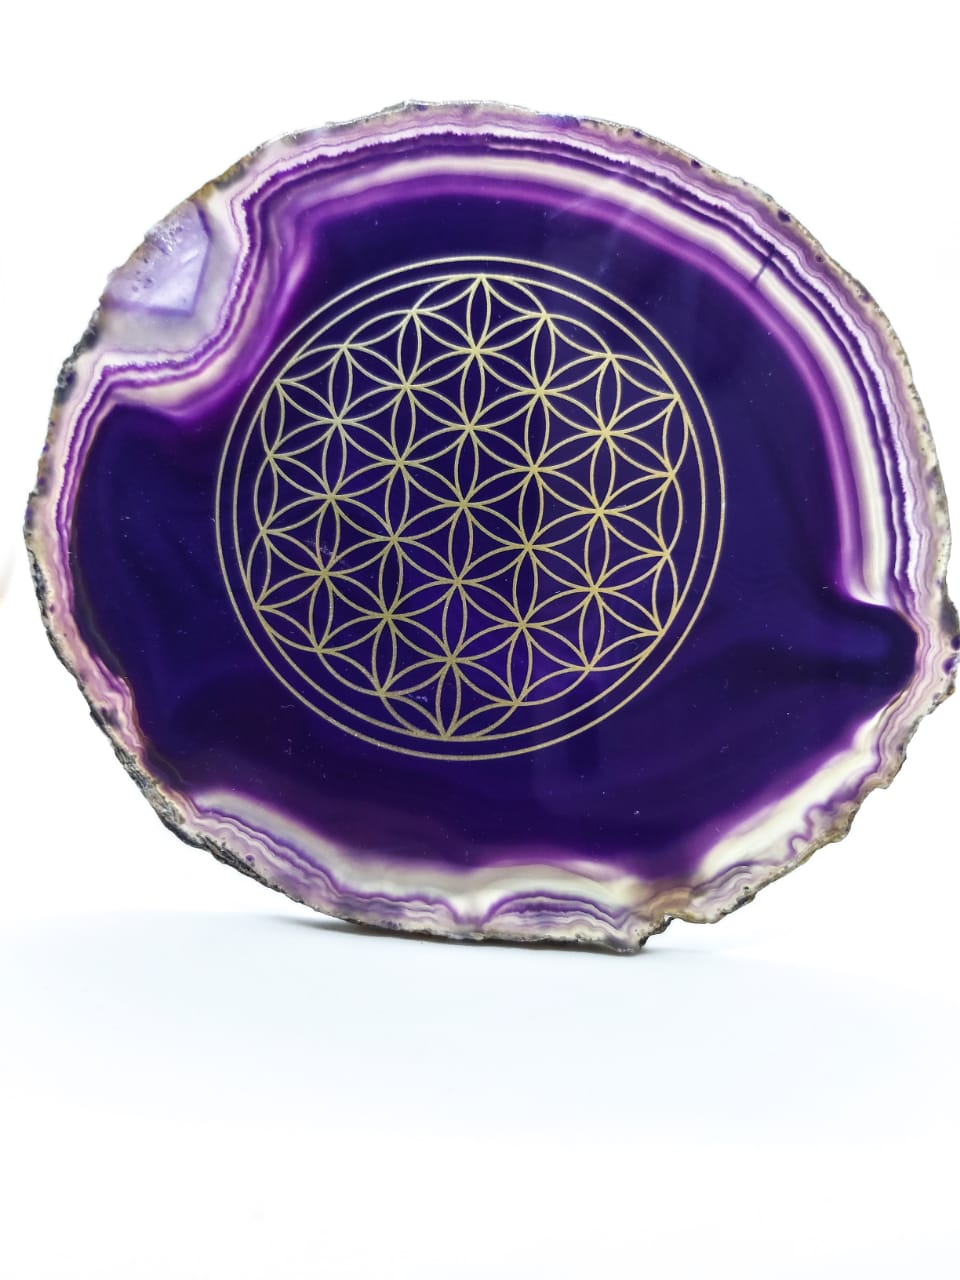 Flower of life on a natural shape purple agate gemstone